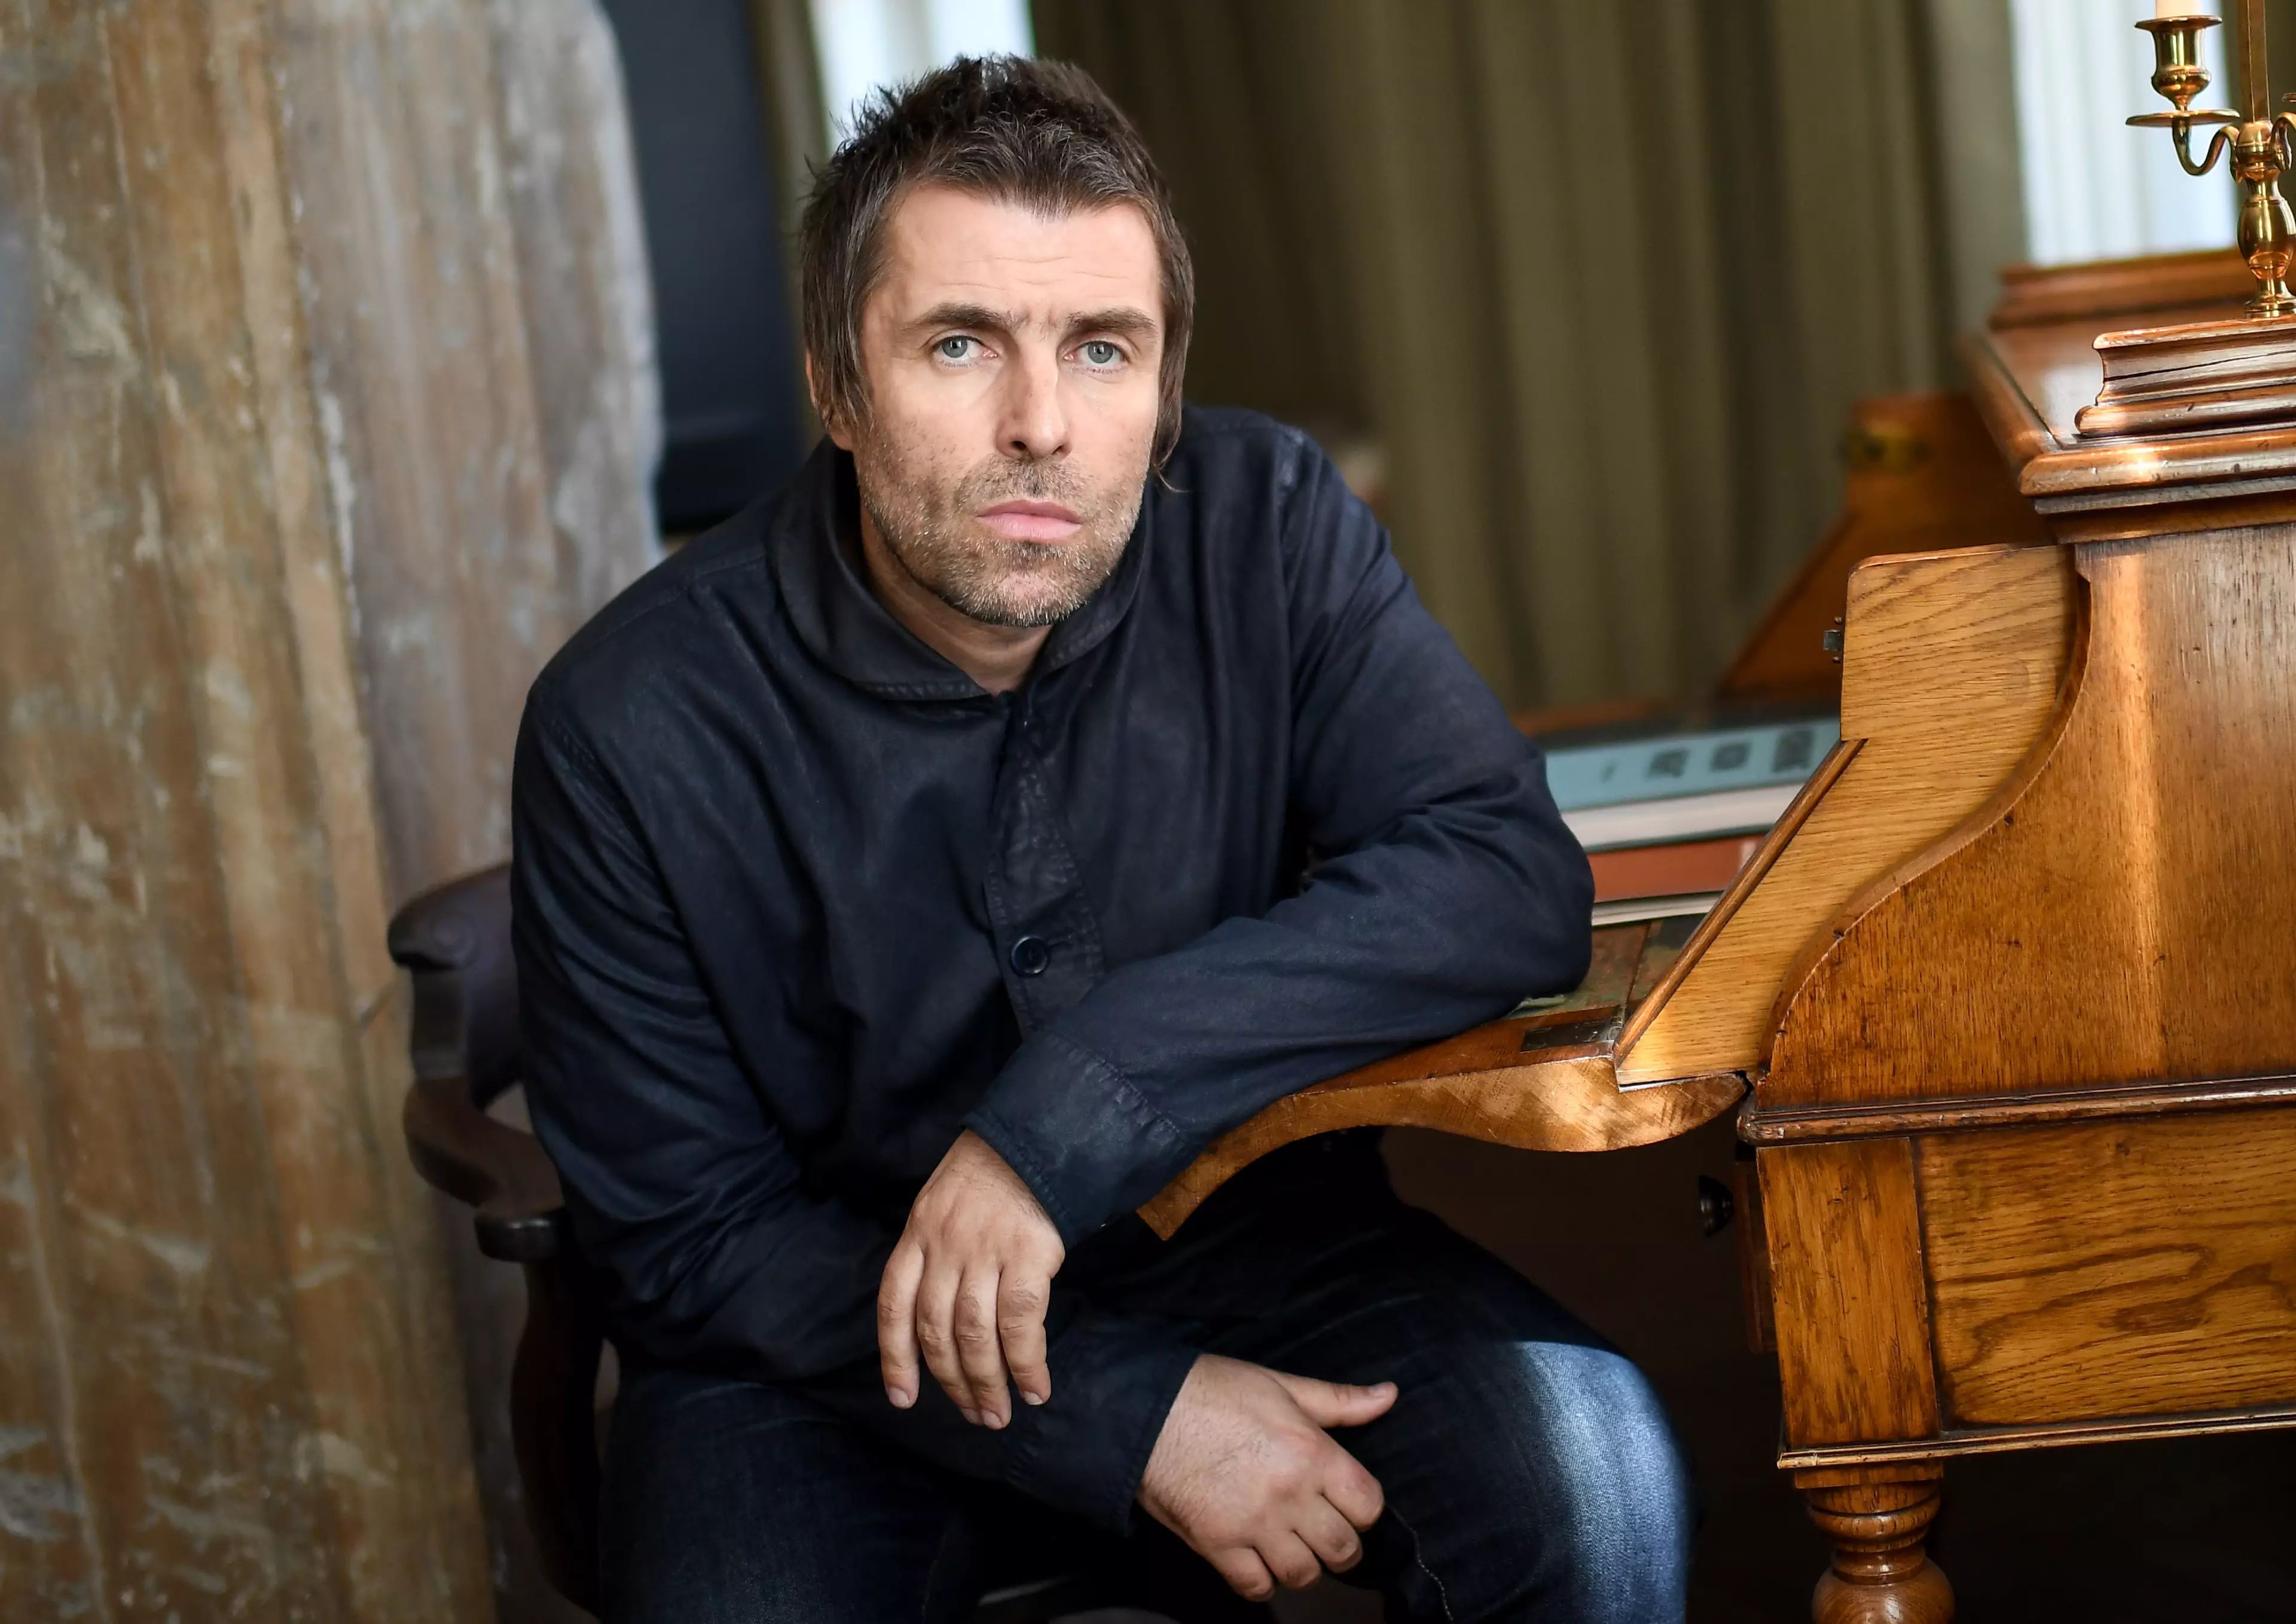 Former Oasis Band Member Liam Gallagher.